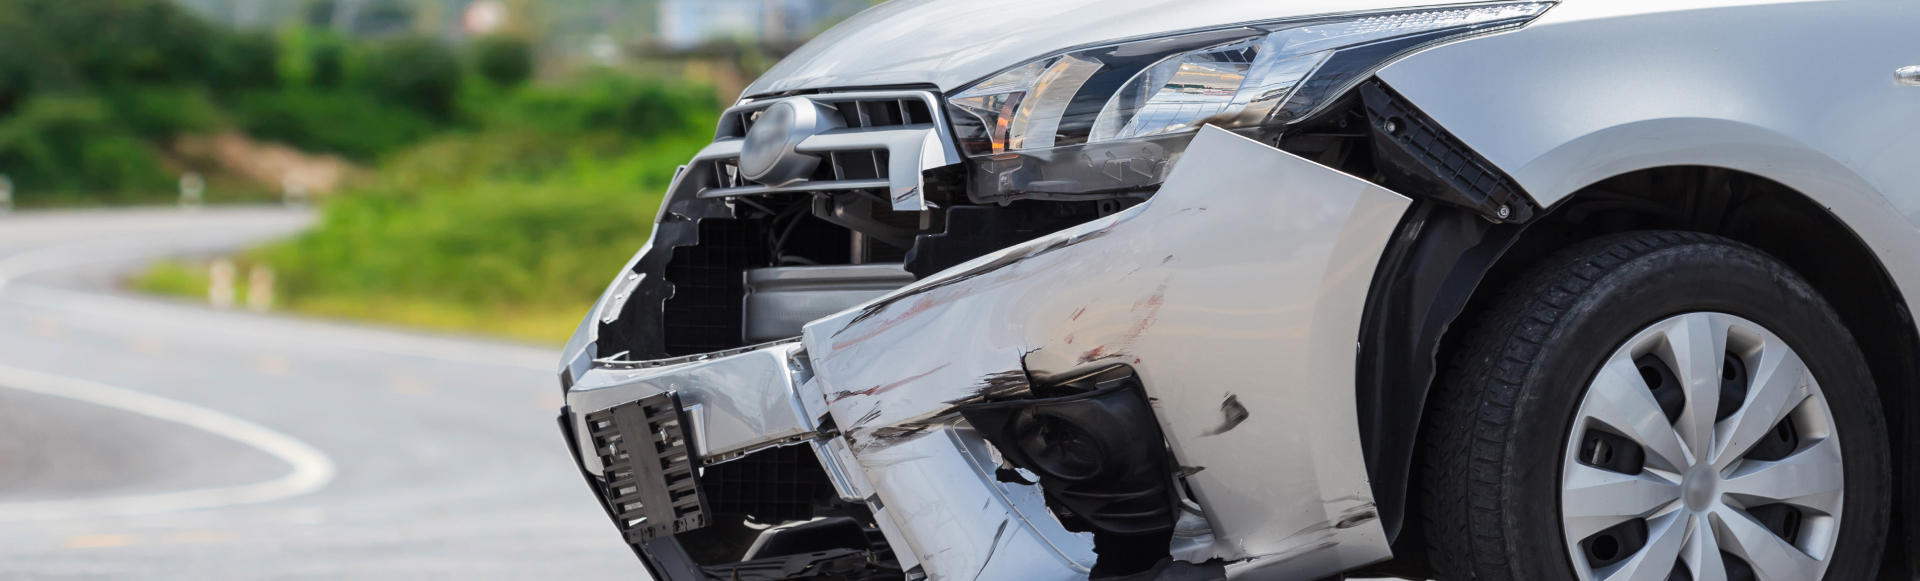 Silver car get damaged by crash accident on the road Car repair or car insurance concept